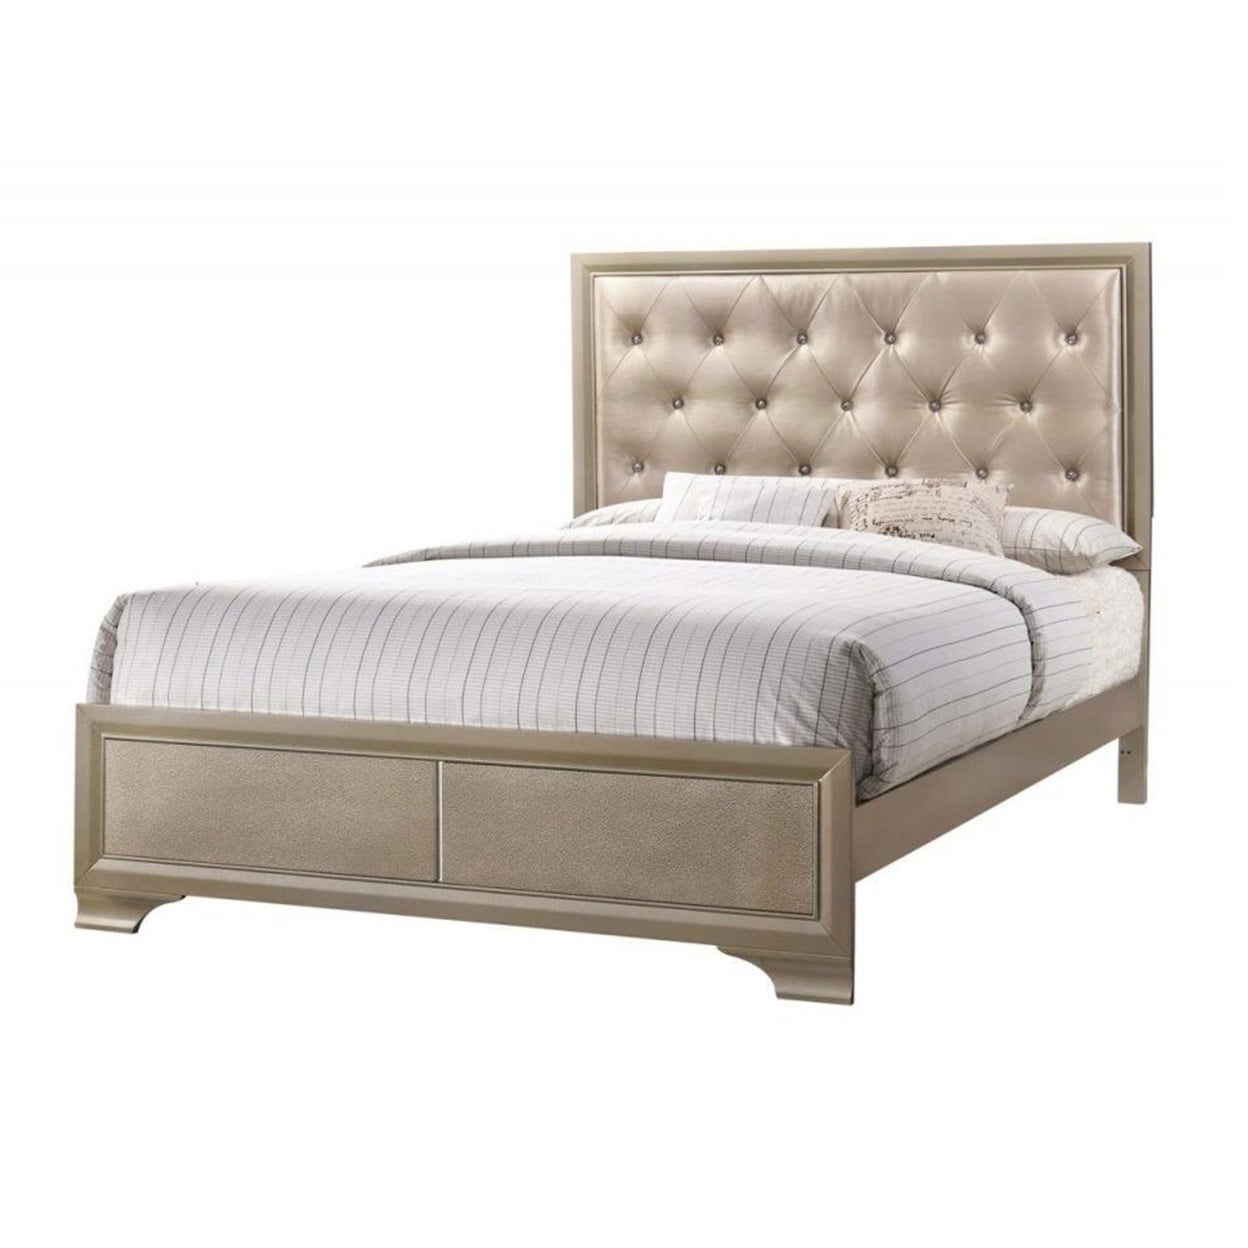 BM208547 Transitional Wooden Queen Size Bed with Button Tufted Headboard, Champagne -  Benzara